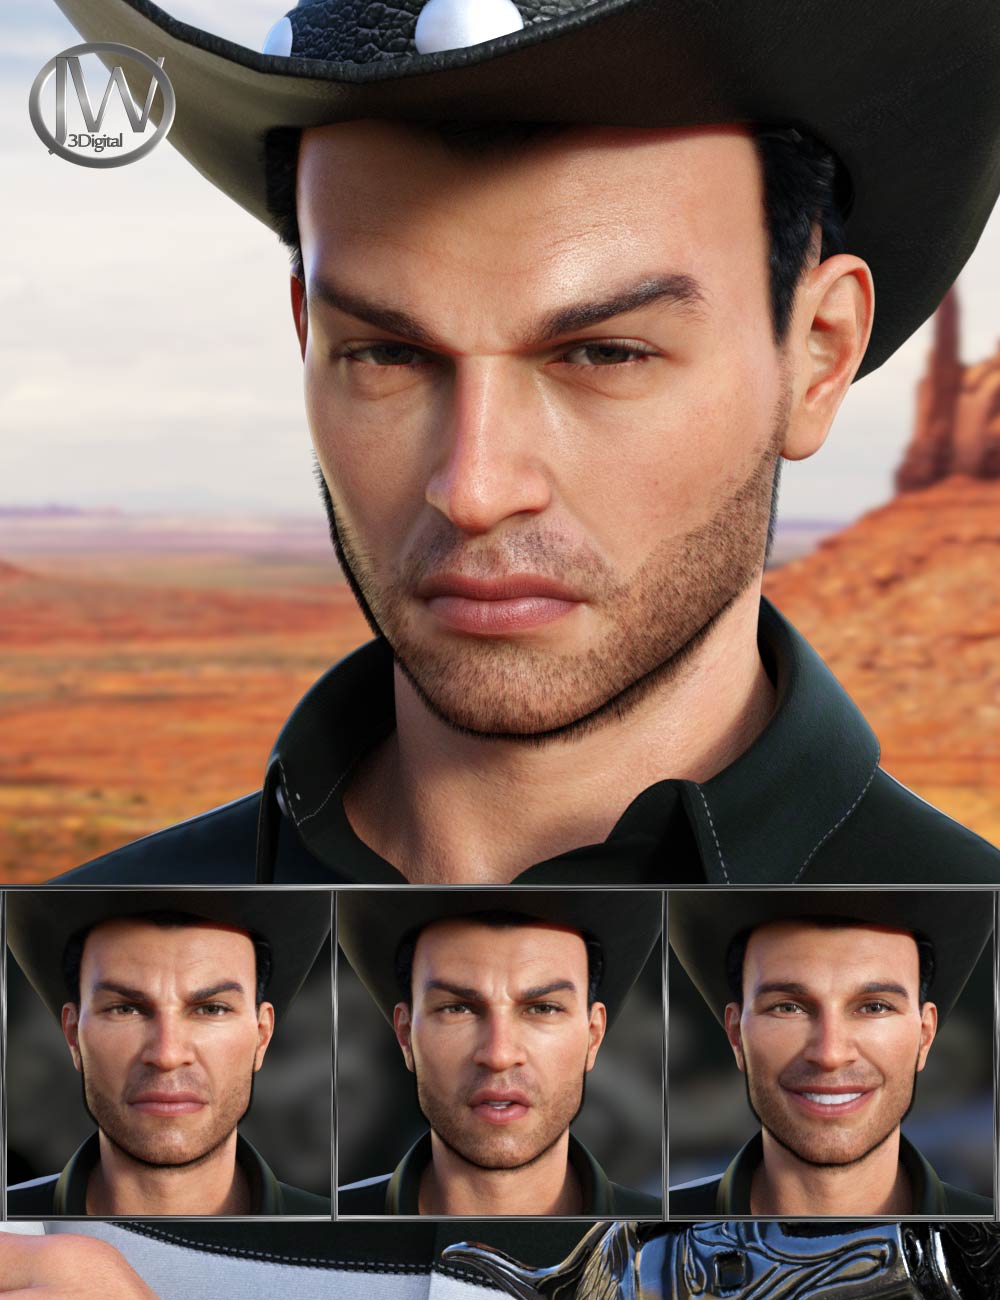 Cowboy Expressions for Genesis 8 Male and Holt 8 by: JWolf, 3D Models by Daz 3D